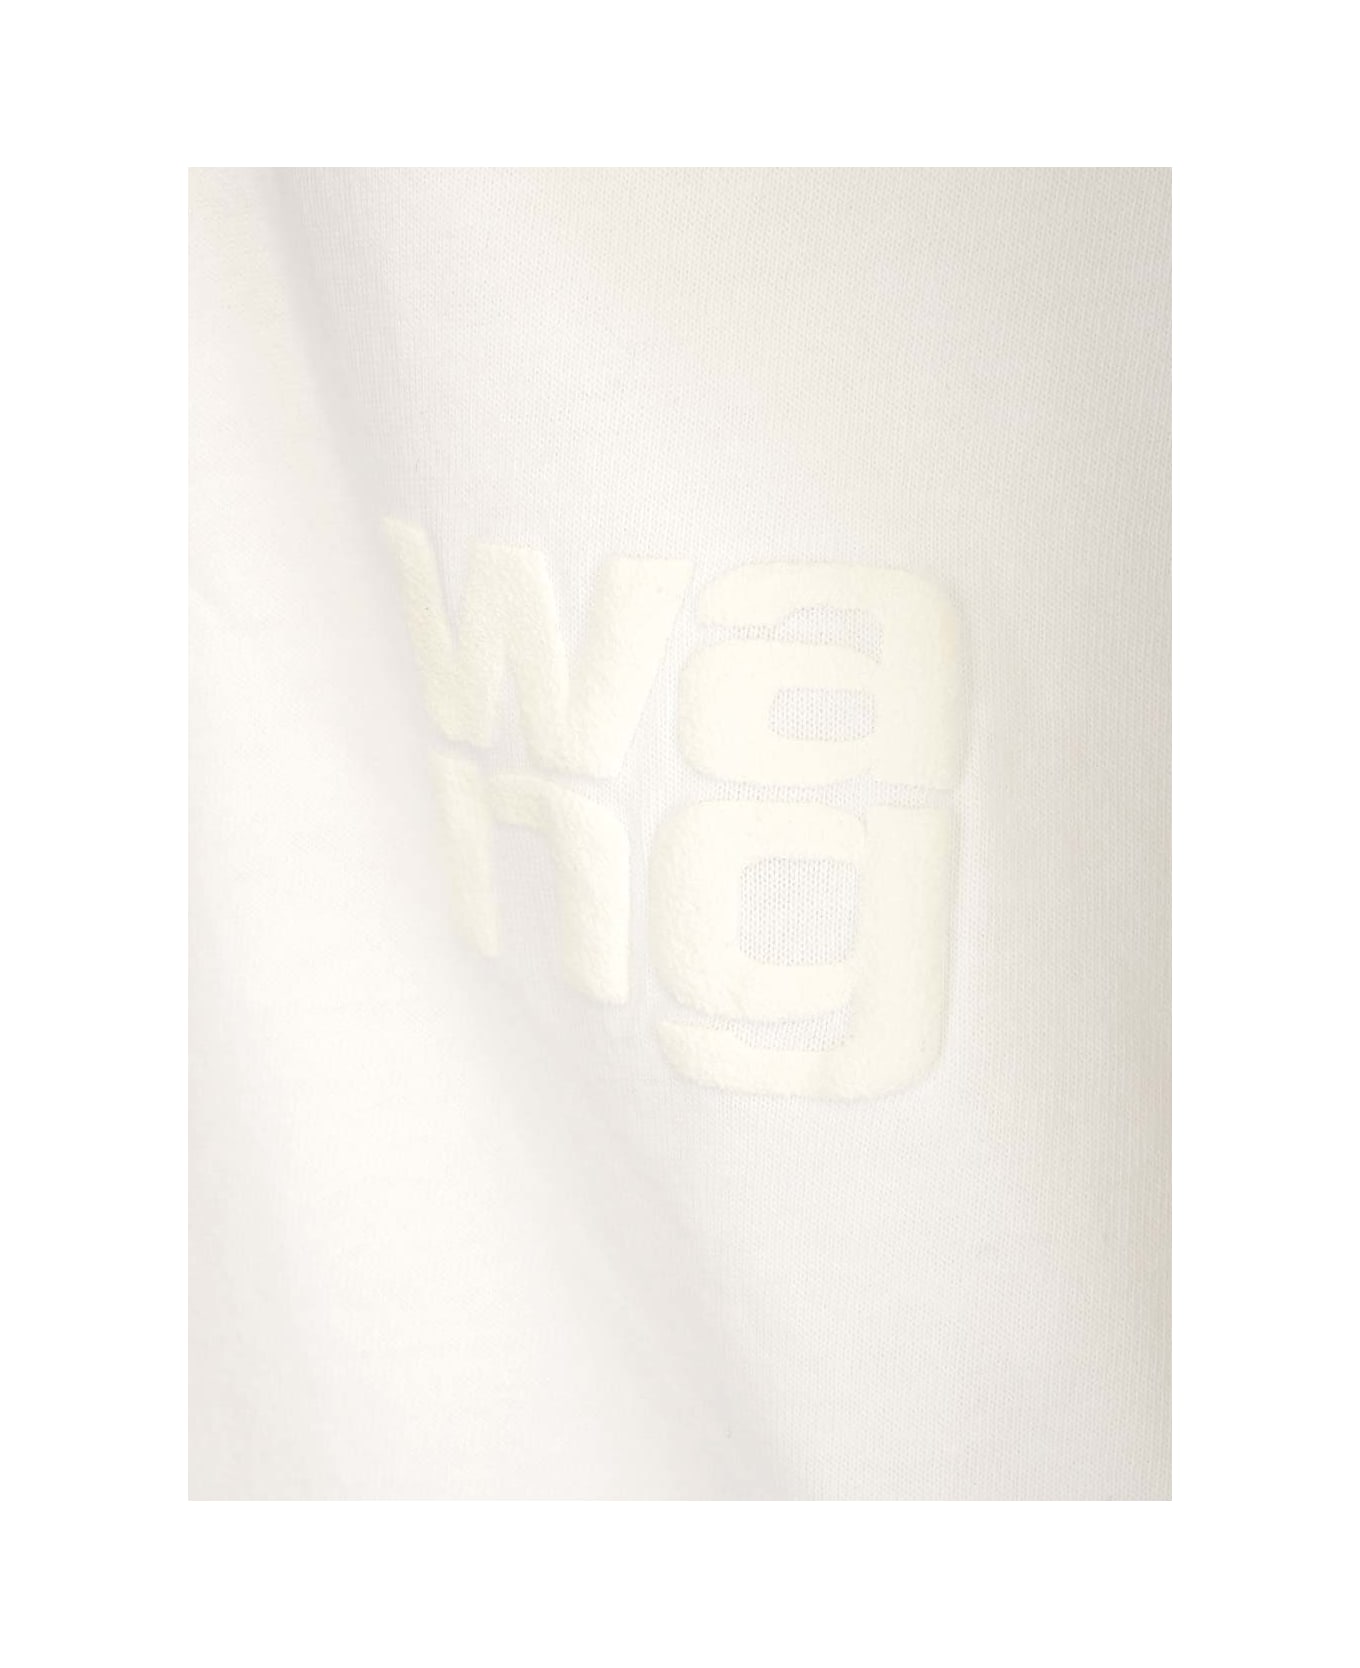 T by Alexander Wang Essential White T-shirt - WHITE Tシャツ